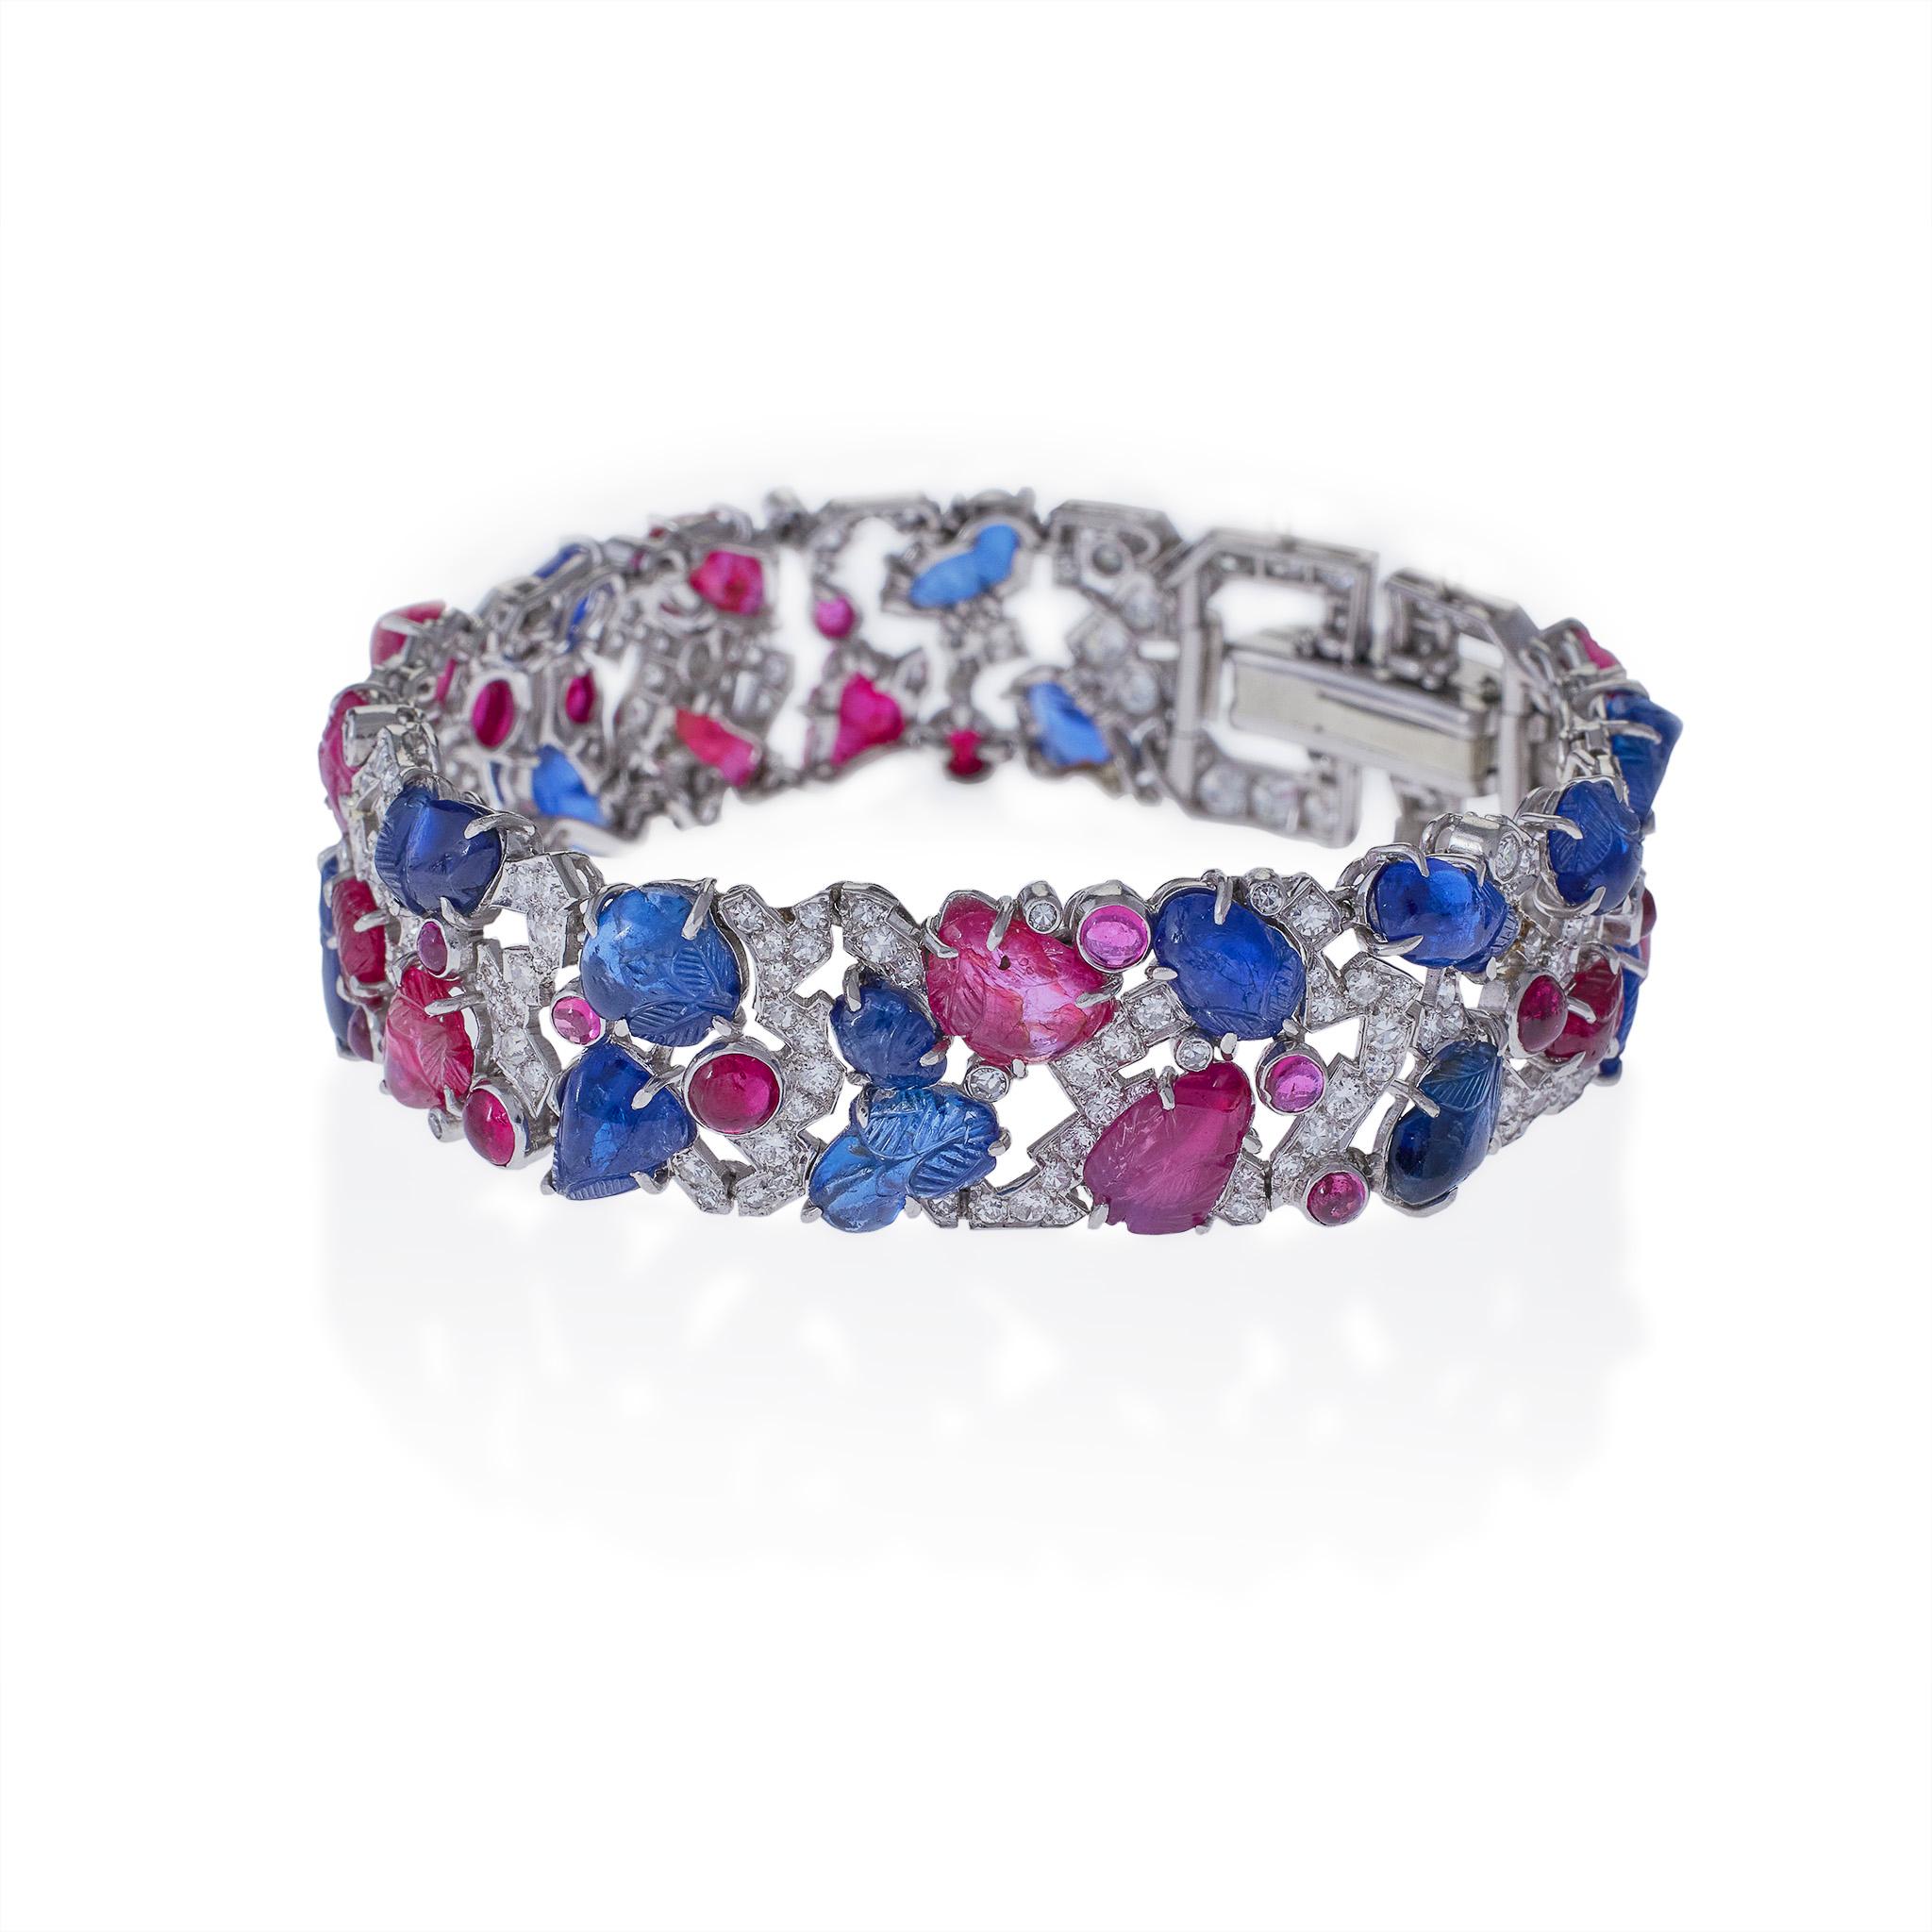 

Created in the 1920s, this Art Deco “tutti frutti” strap bracelet is composed of sapphires, rubies, diamonds, and platinum. It is designed as a highly stylized diamond vine with carved ruby and sapphire leaves and cabochon ruby berries, completed